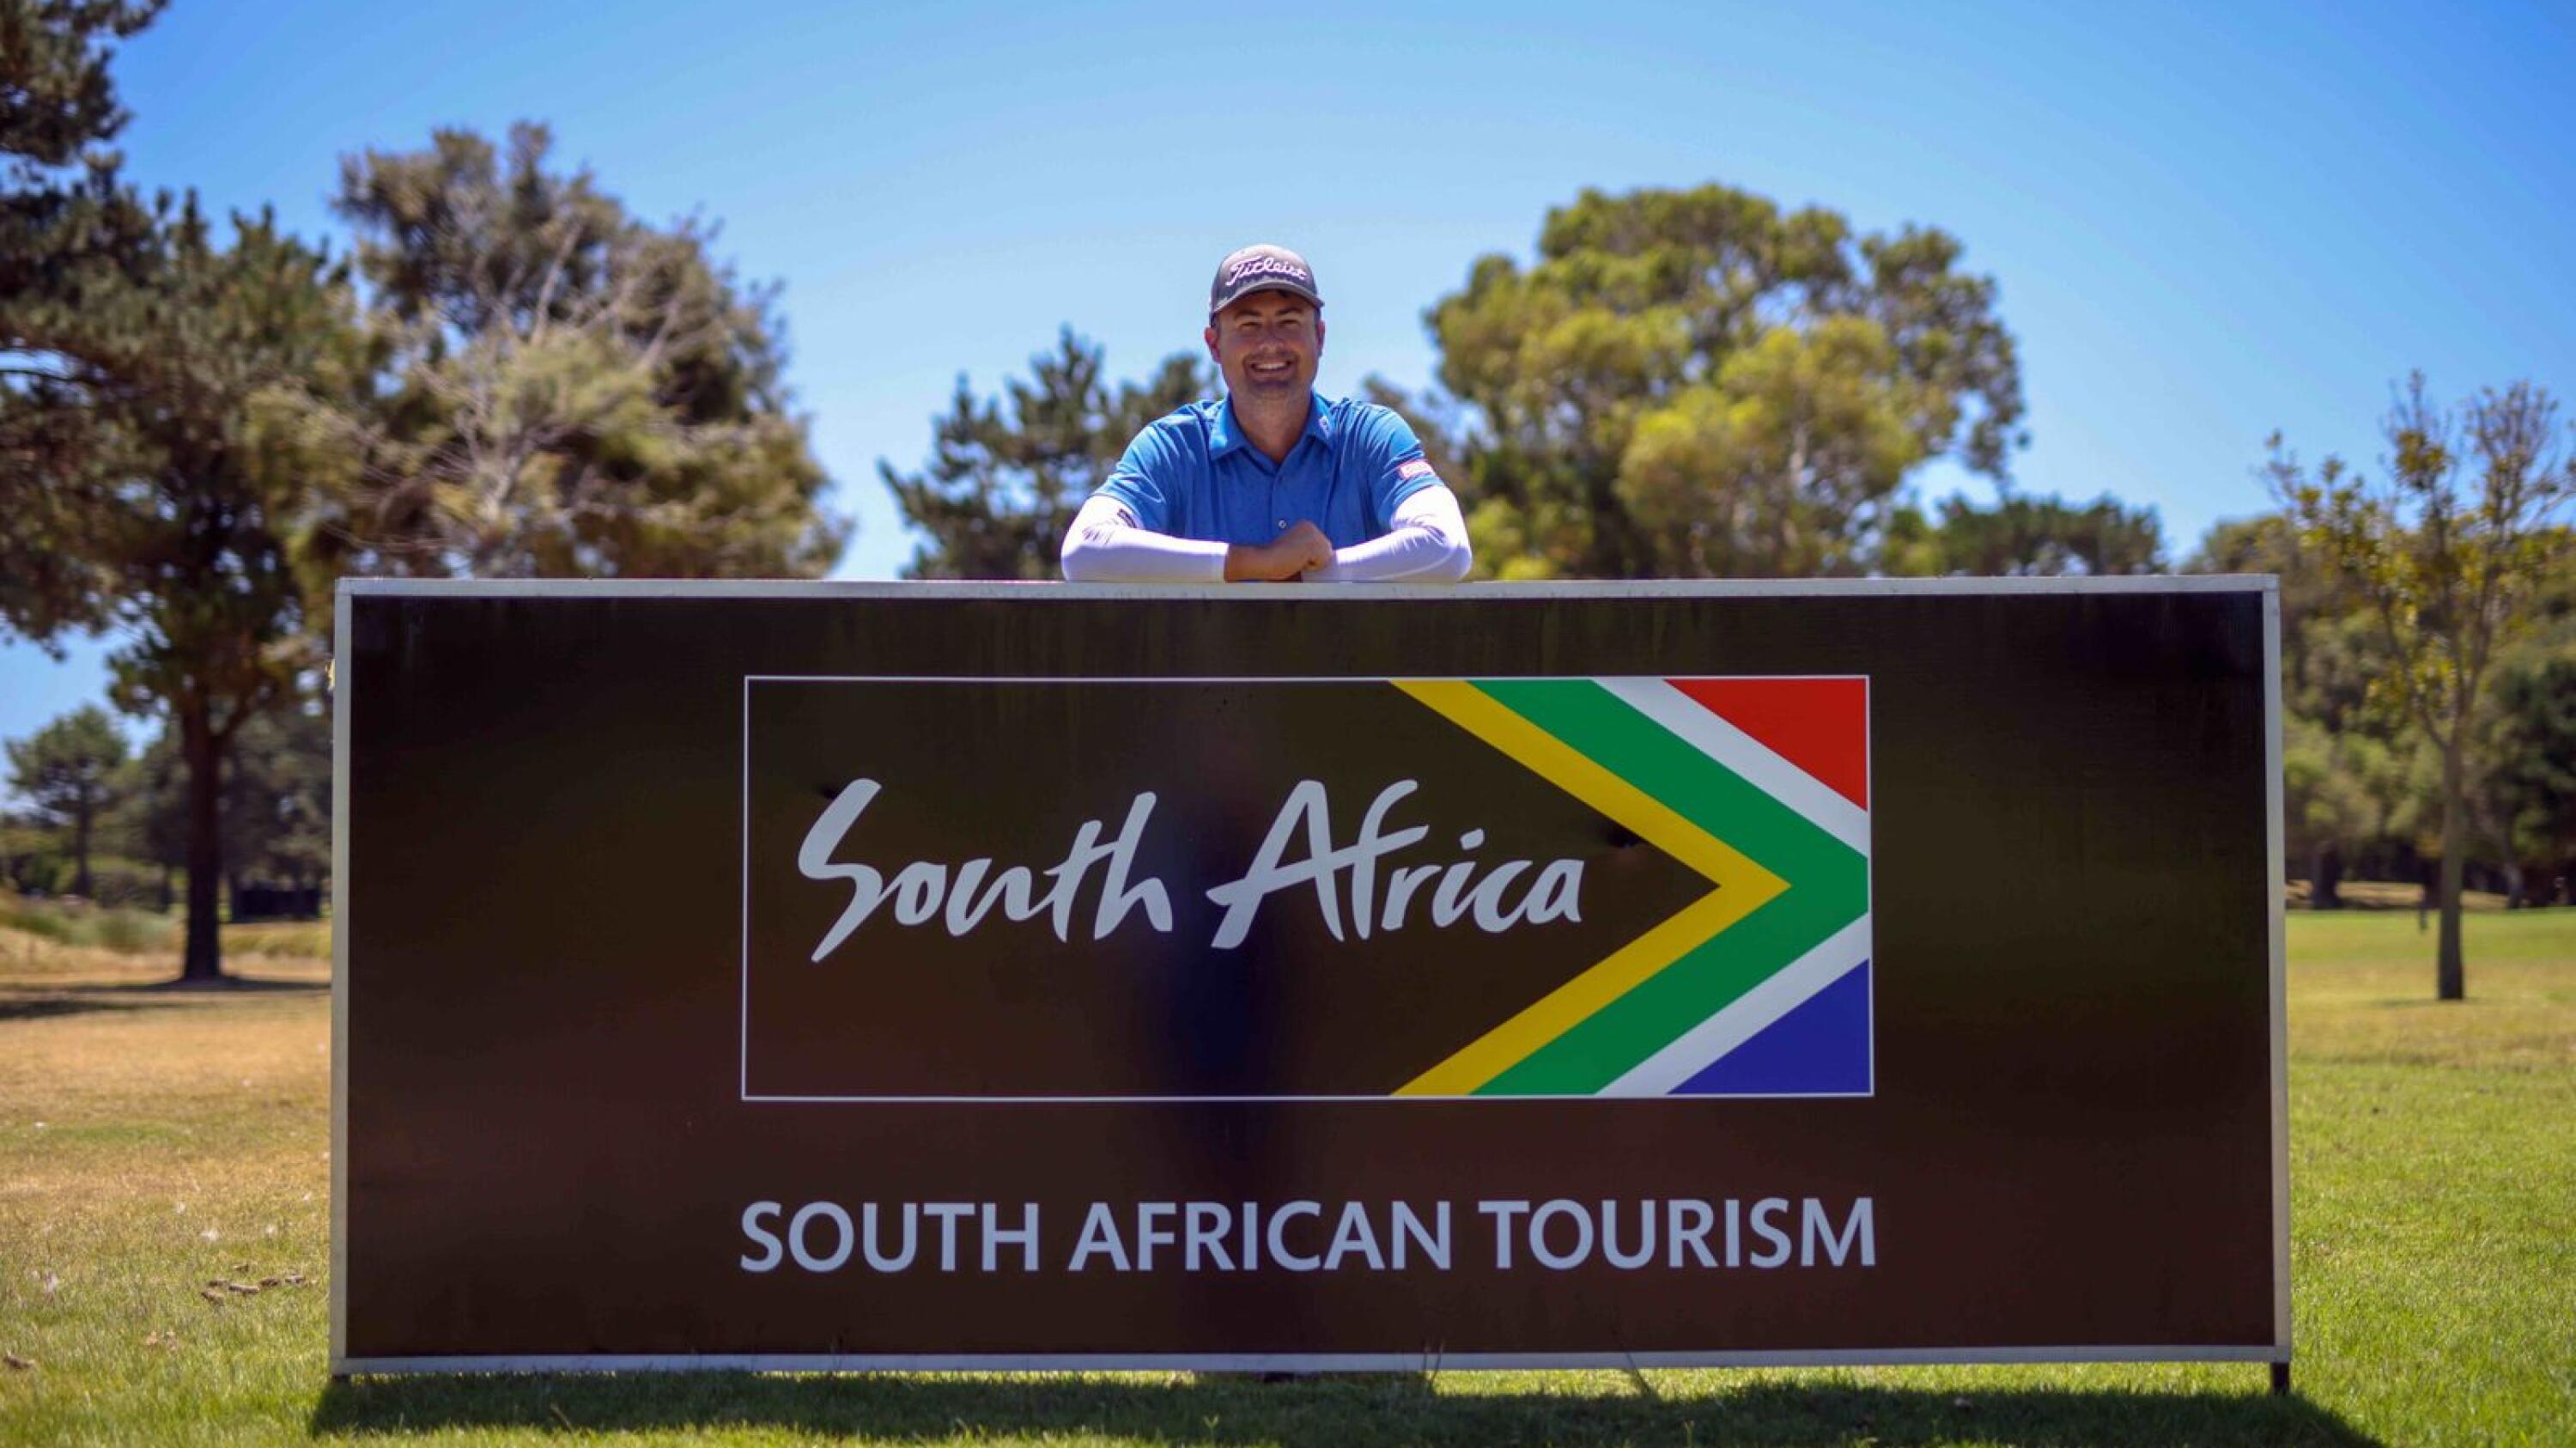 Sunshine Tour professional Jake Roos at this week’s Bain’s Whisky Cape Town Open. Roos won the inaugural tournament in 2012